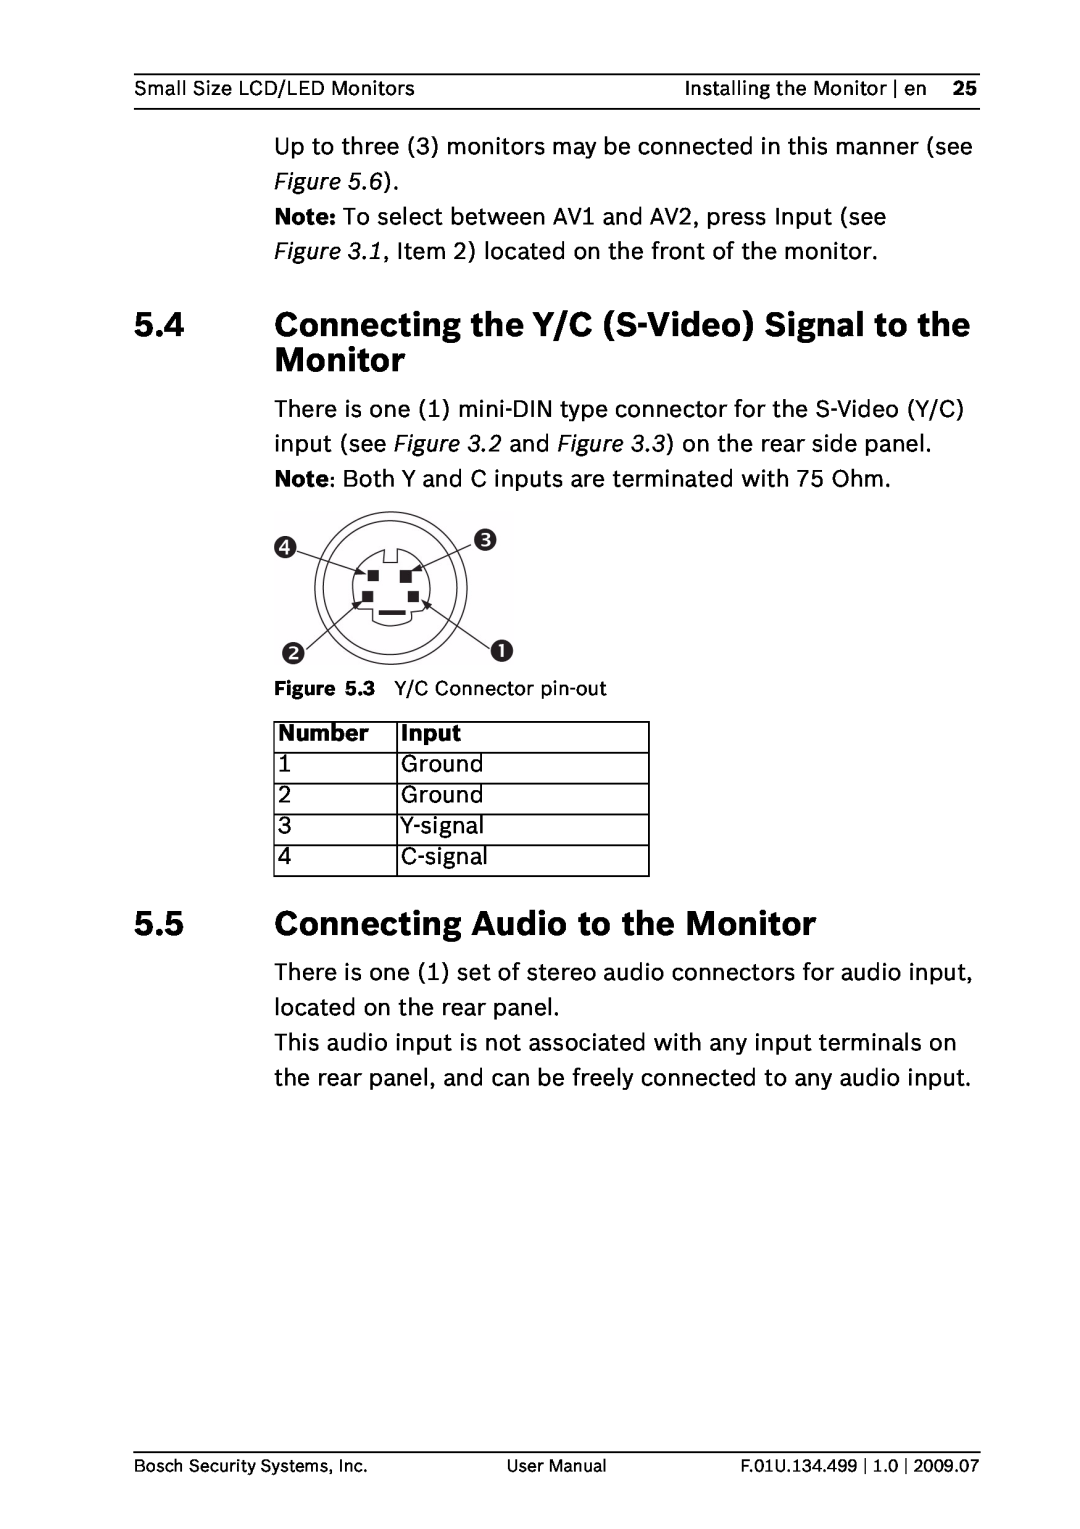 Bosch Appliances UML-100-90 Connecting the Y/C S-Video Signal to the Monitor, Connecting Audio to the Monitor, Number 